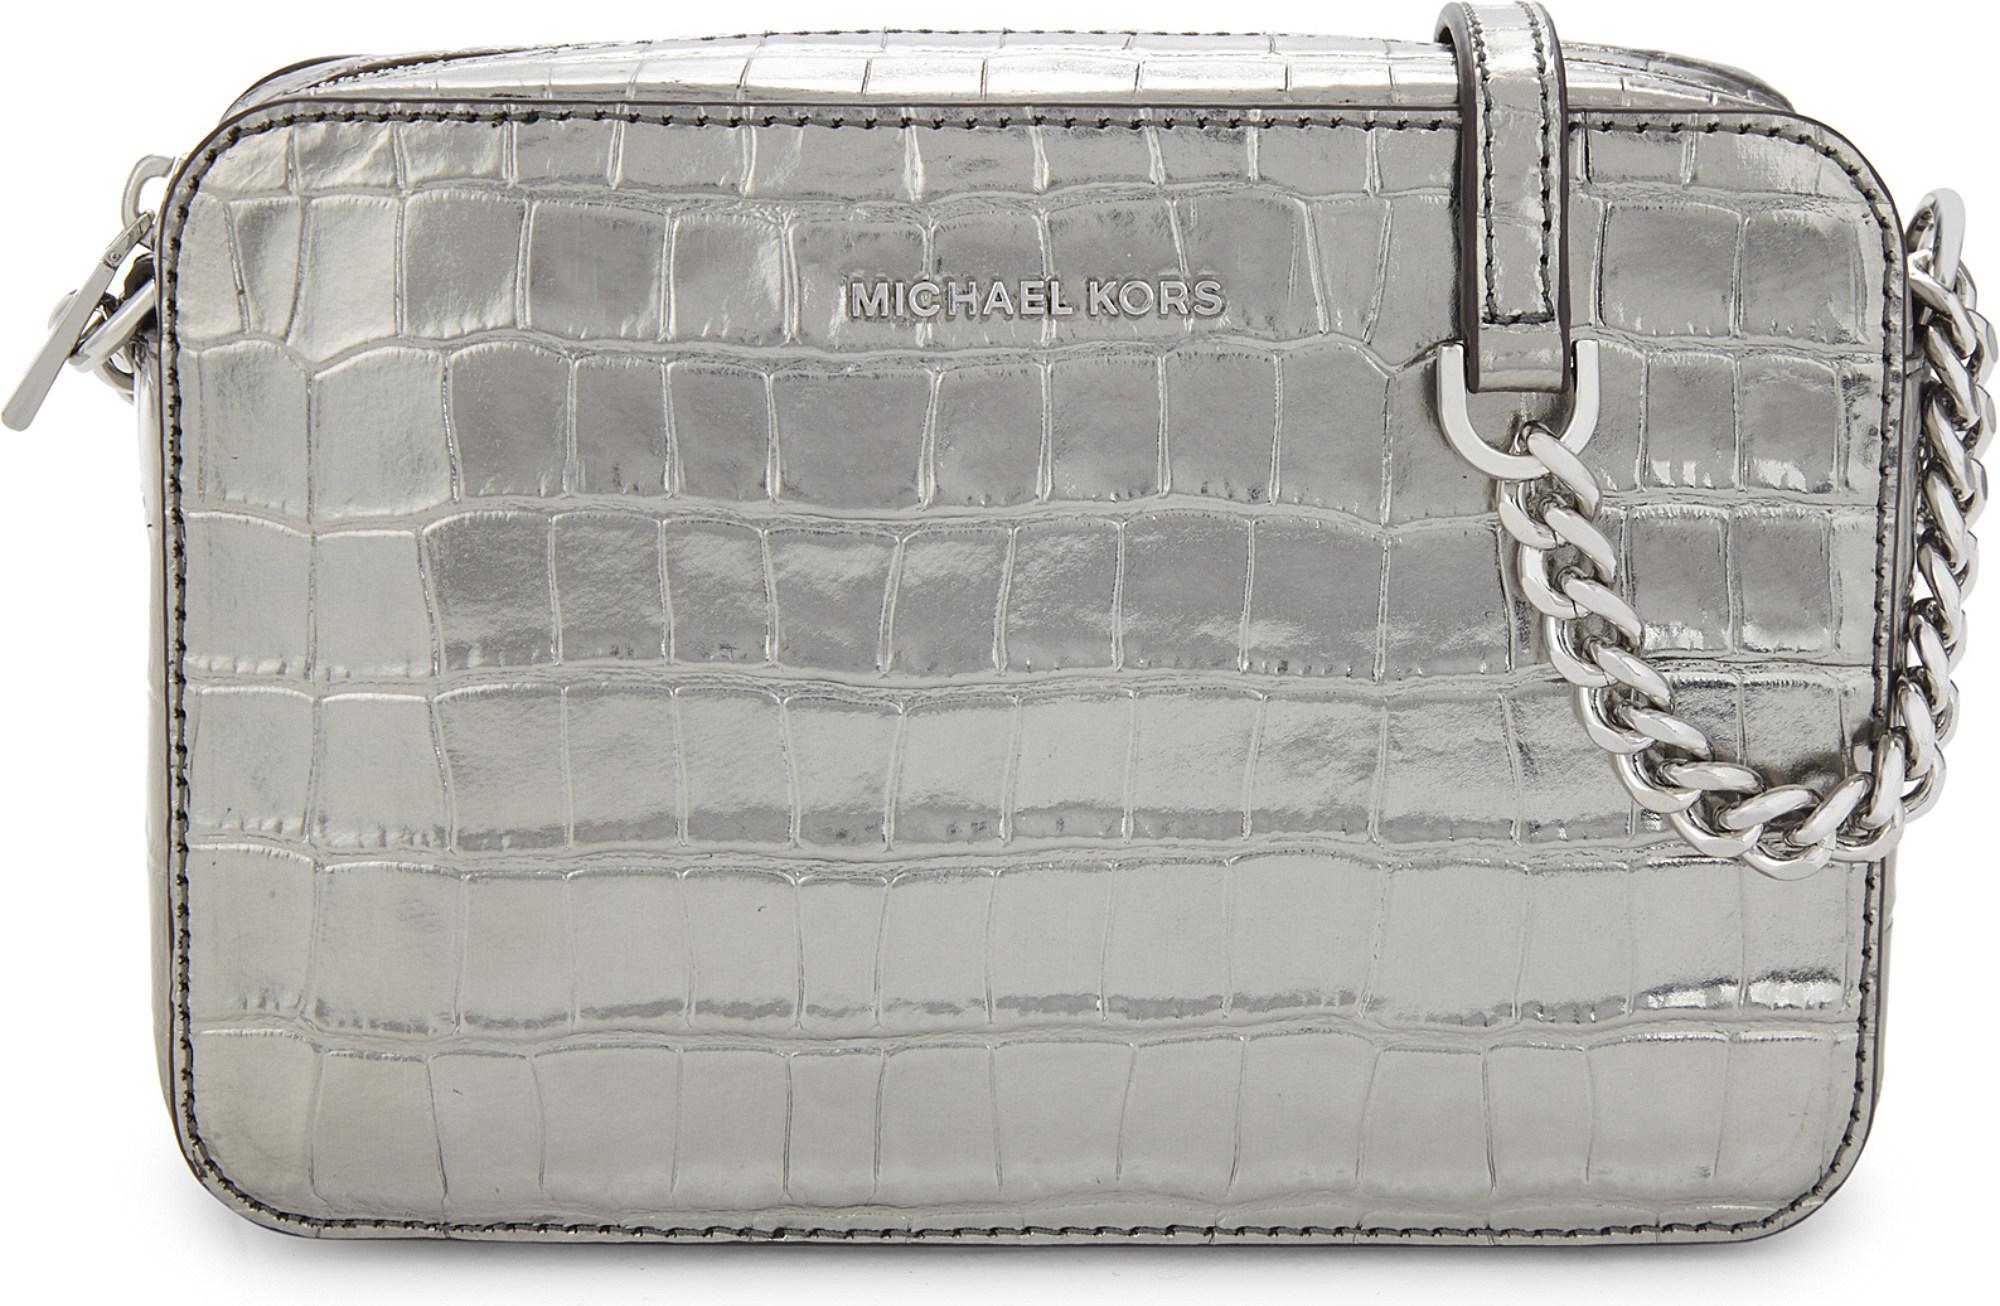 Michael Kors white and silver metallic floral crossbody purse | Purses  crossbody, Metallic silver, Purses